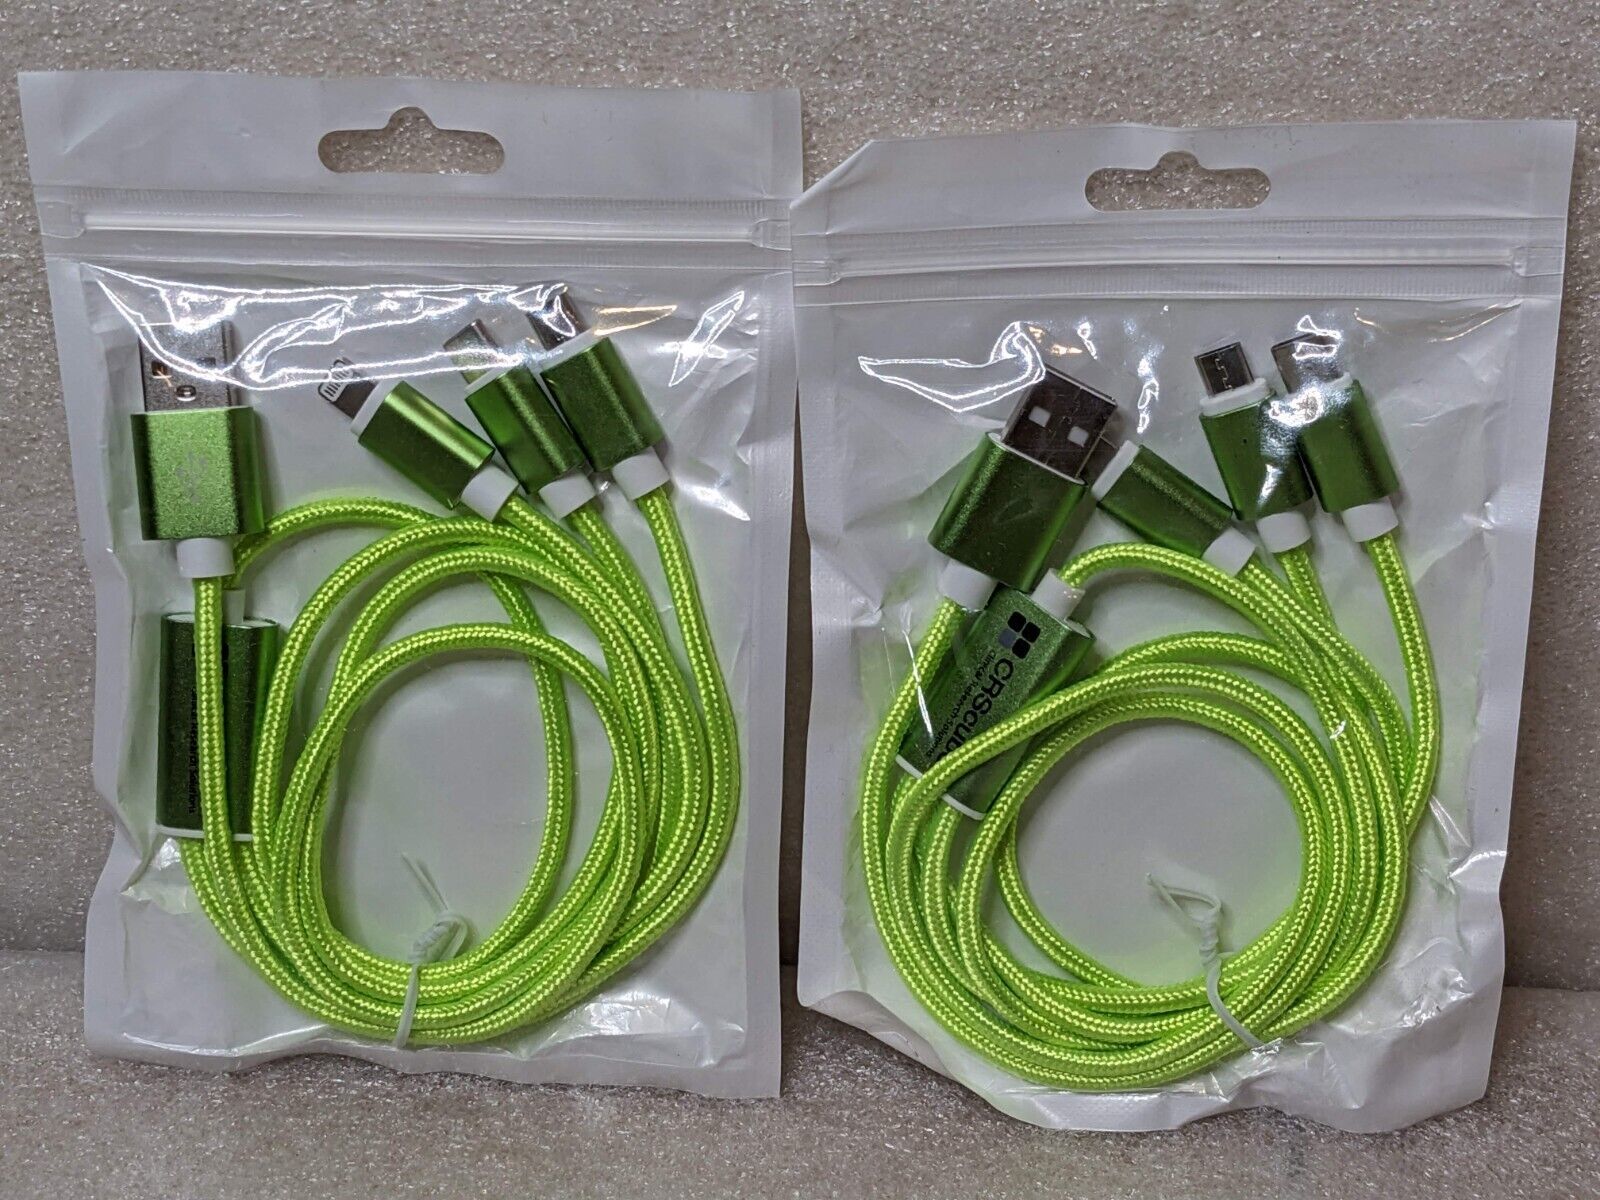 2 x New Multi Charging Cable 3 in 1 USB Fast Charger Cord - Apple/Andriod R2 - $11.89